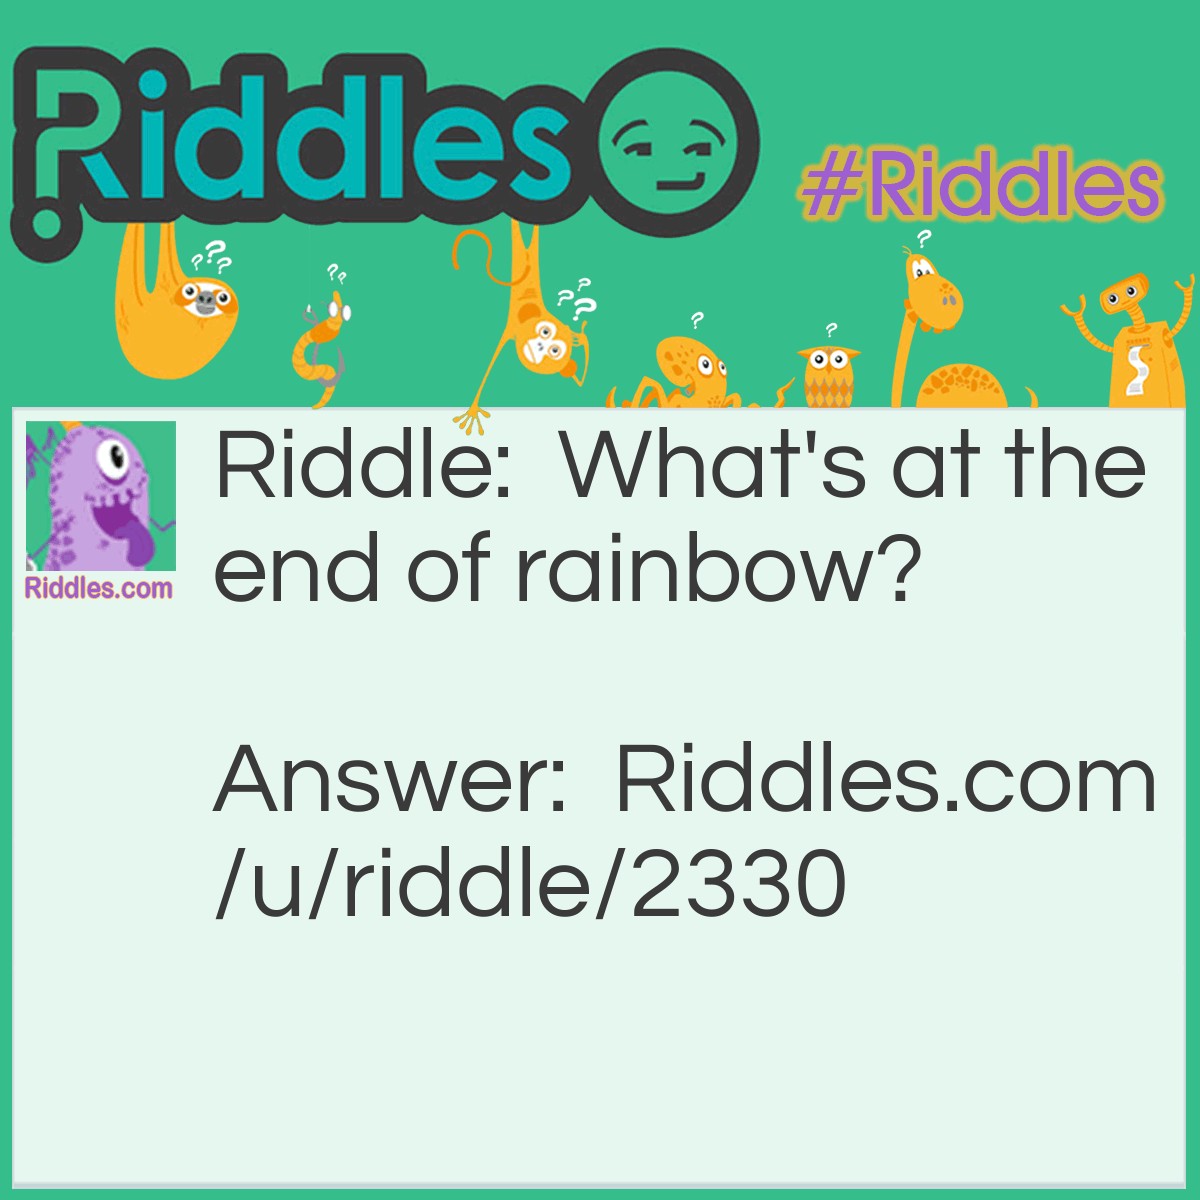 Riddle: What's at the end of rainbow? Answer: W is at the end of the word rainbow.